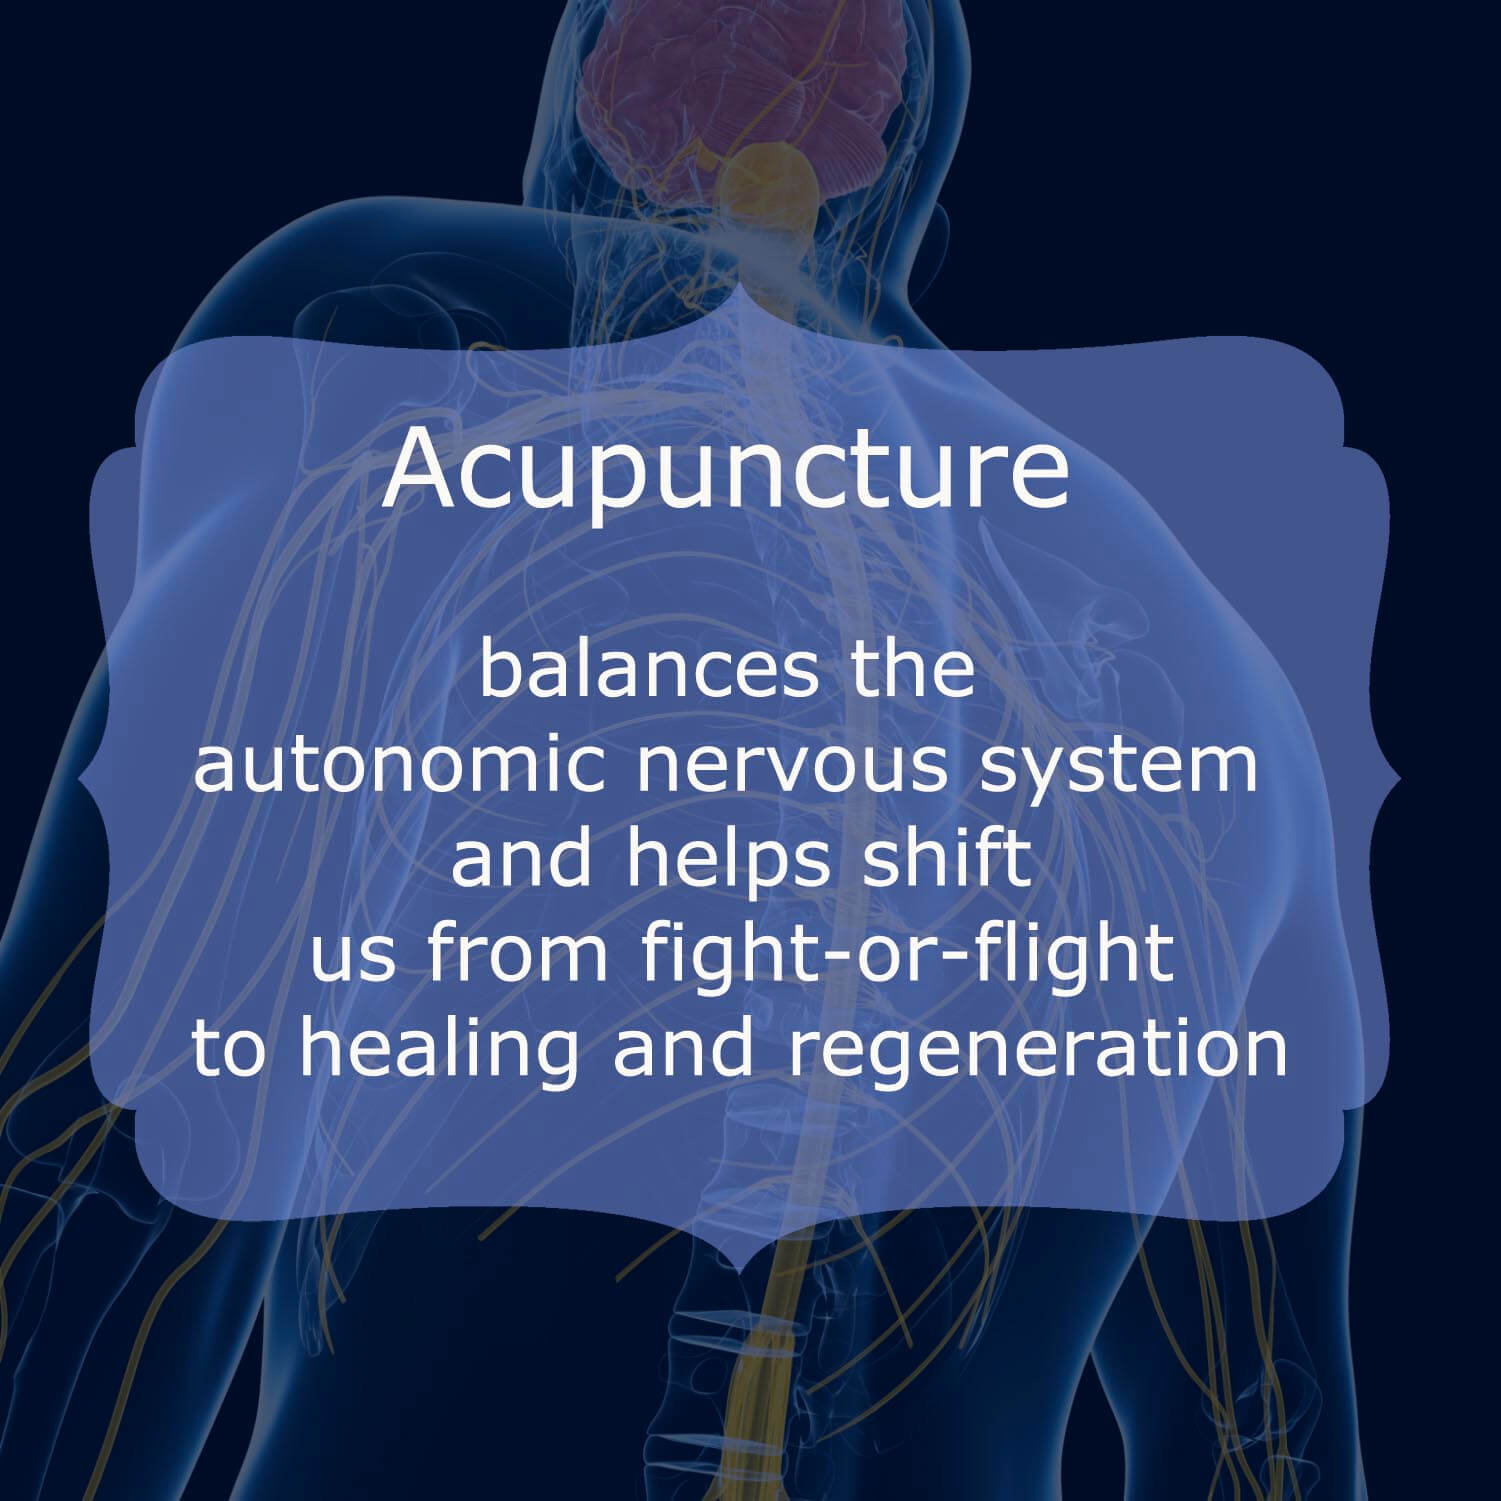 Acupuncture from a Western perspective